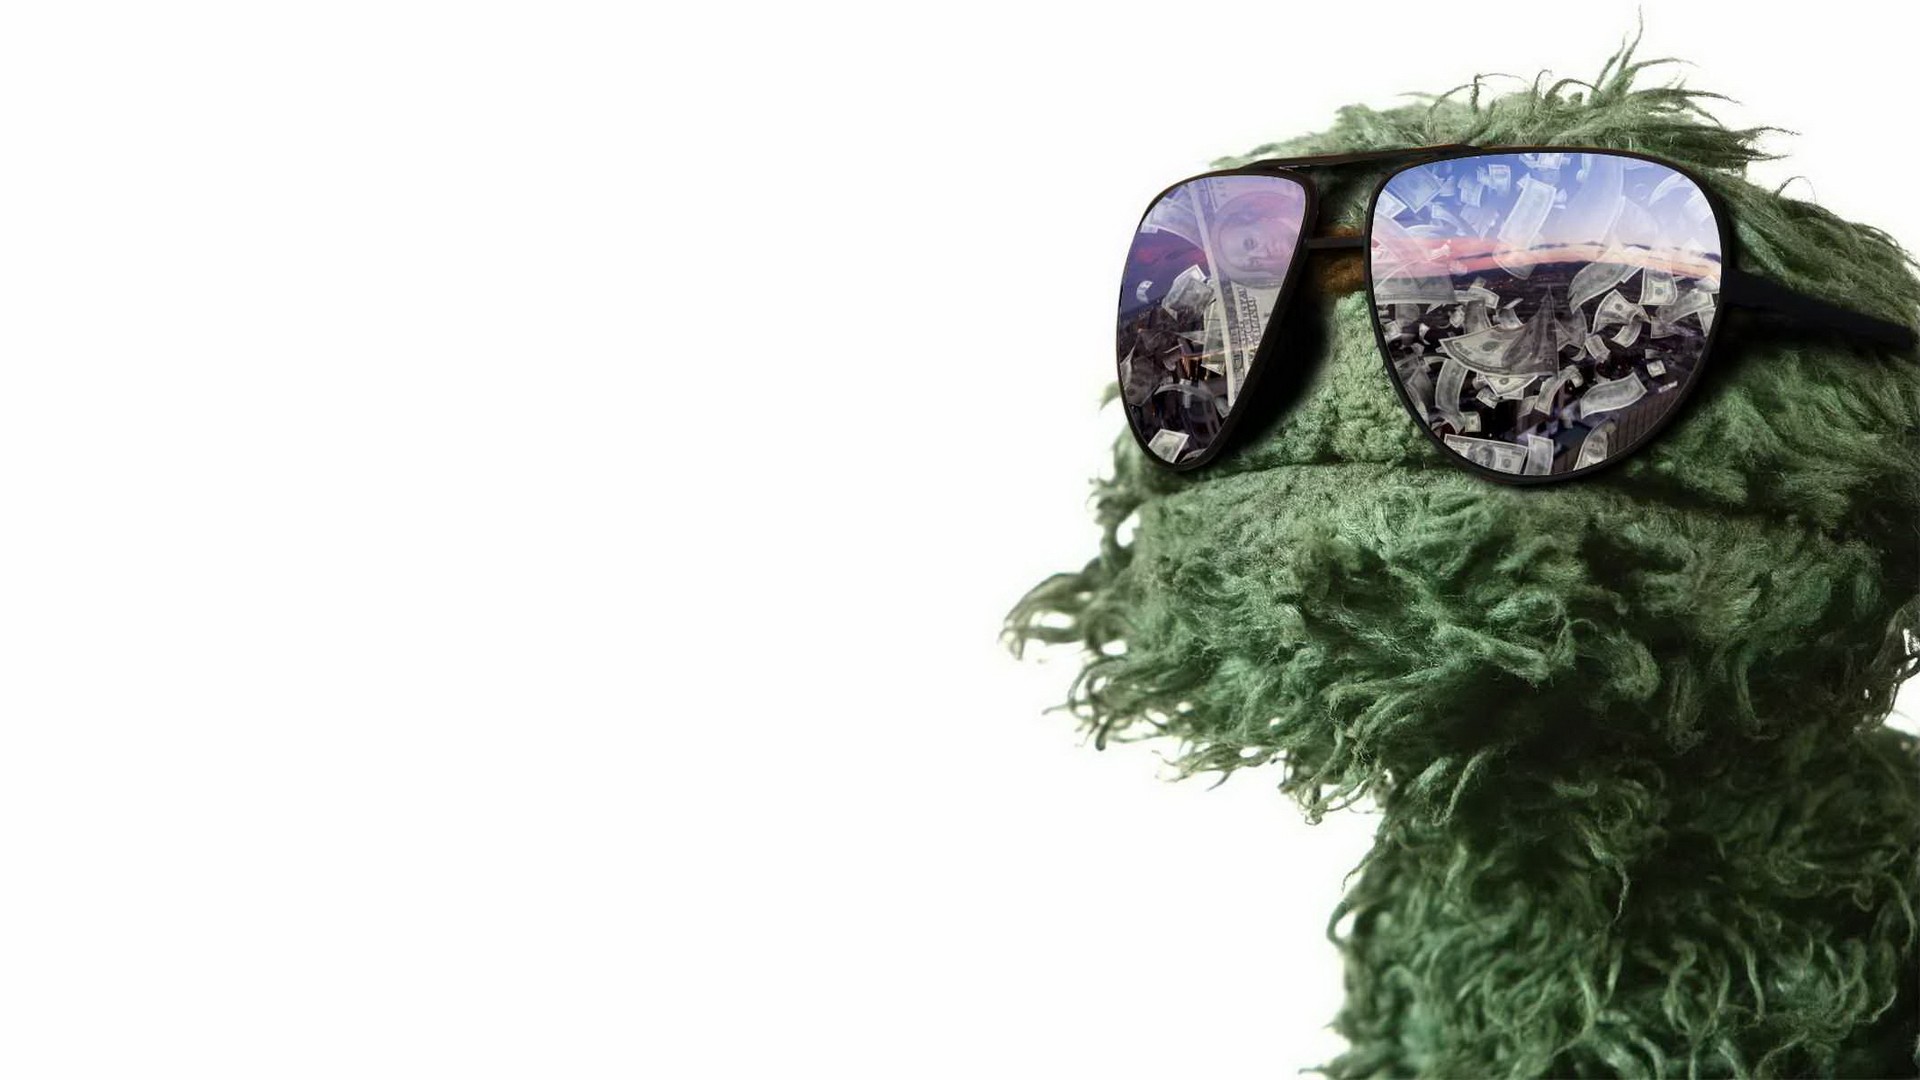 Sup Bruh - Oscar The Grouch Meme , HD Wallpaper & Backgrounds